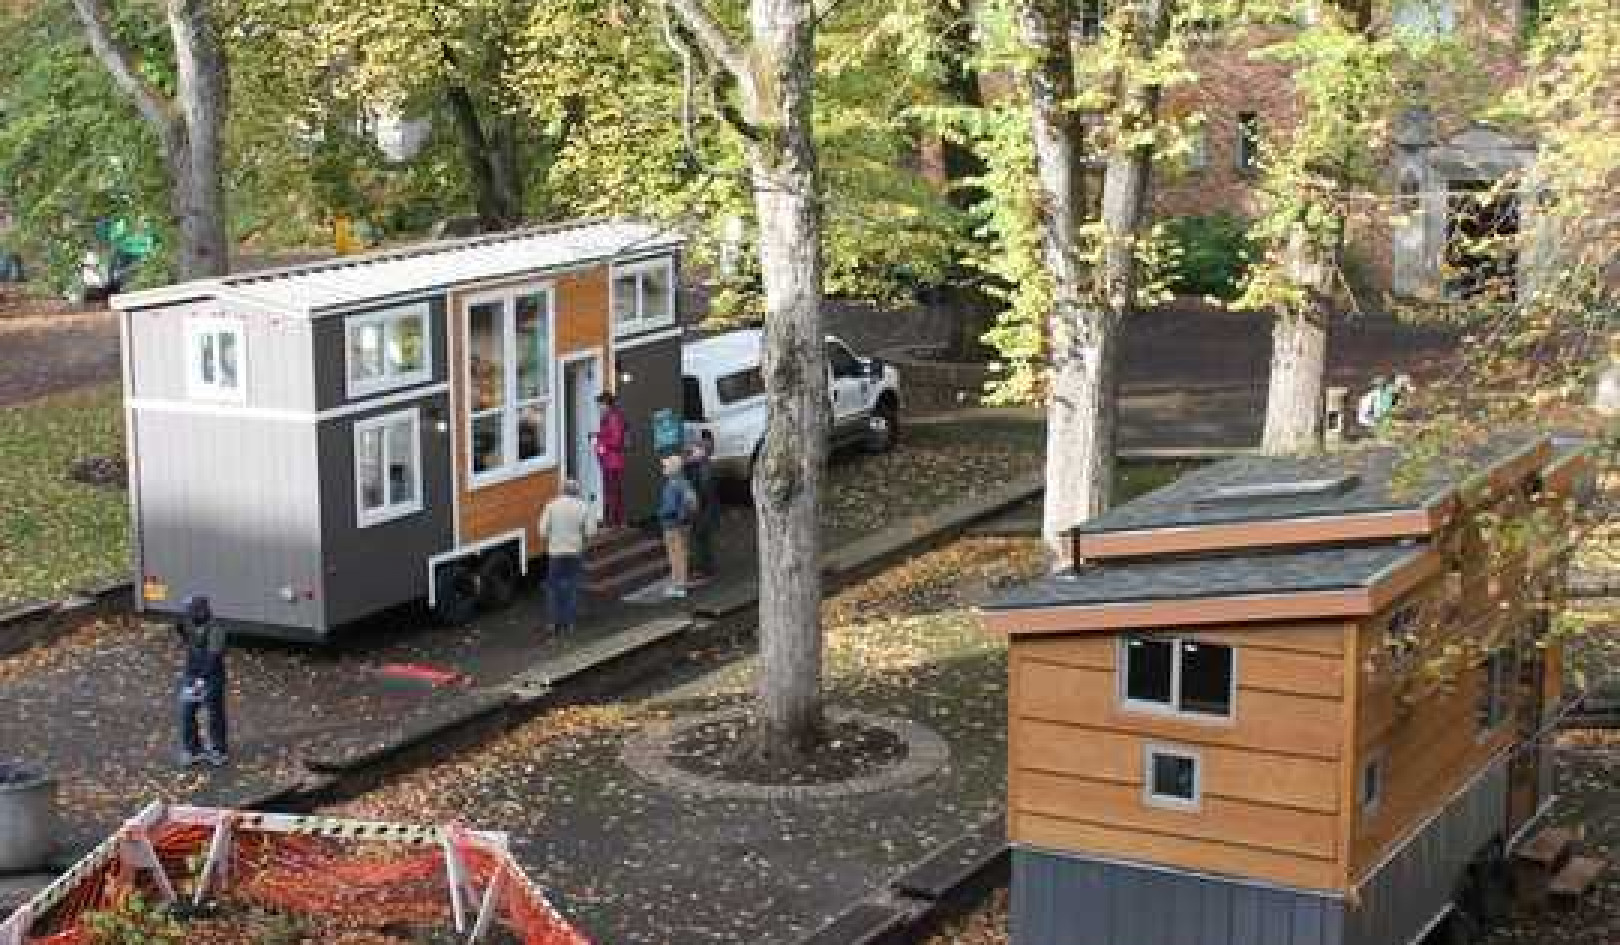 When People Downsize To Tiny Houses, They Adopt More Environmentally Friendly Lifestyles